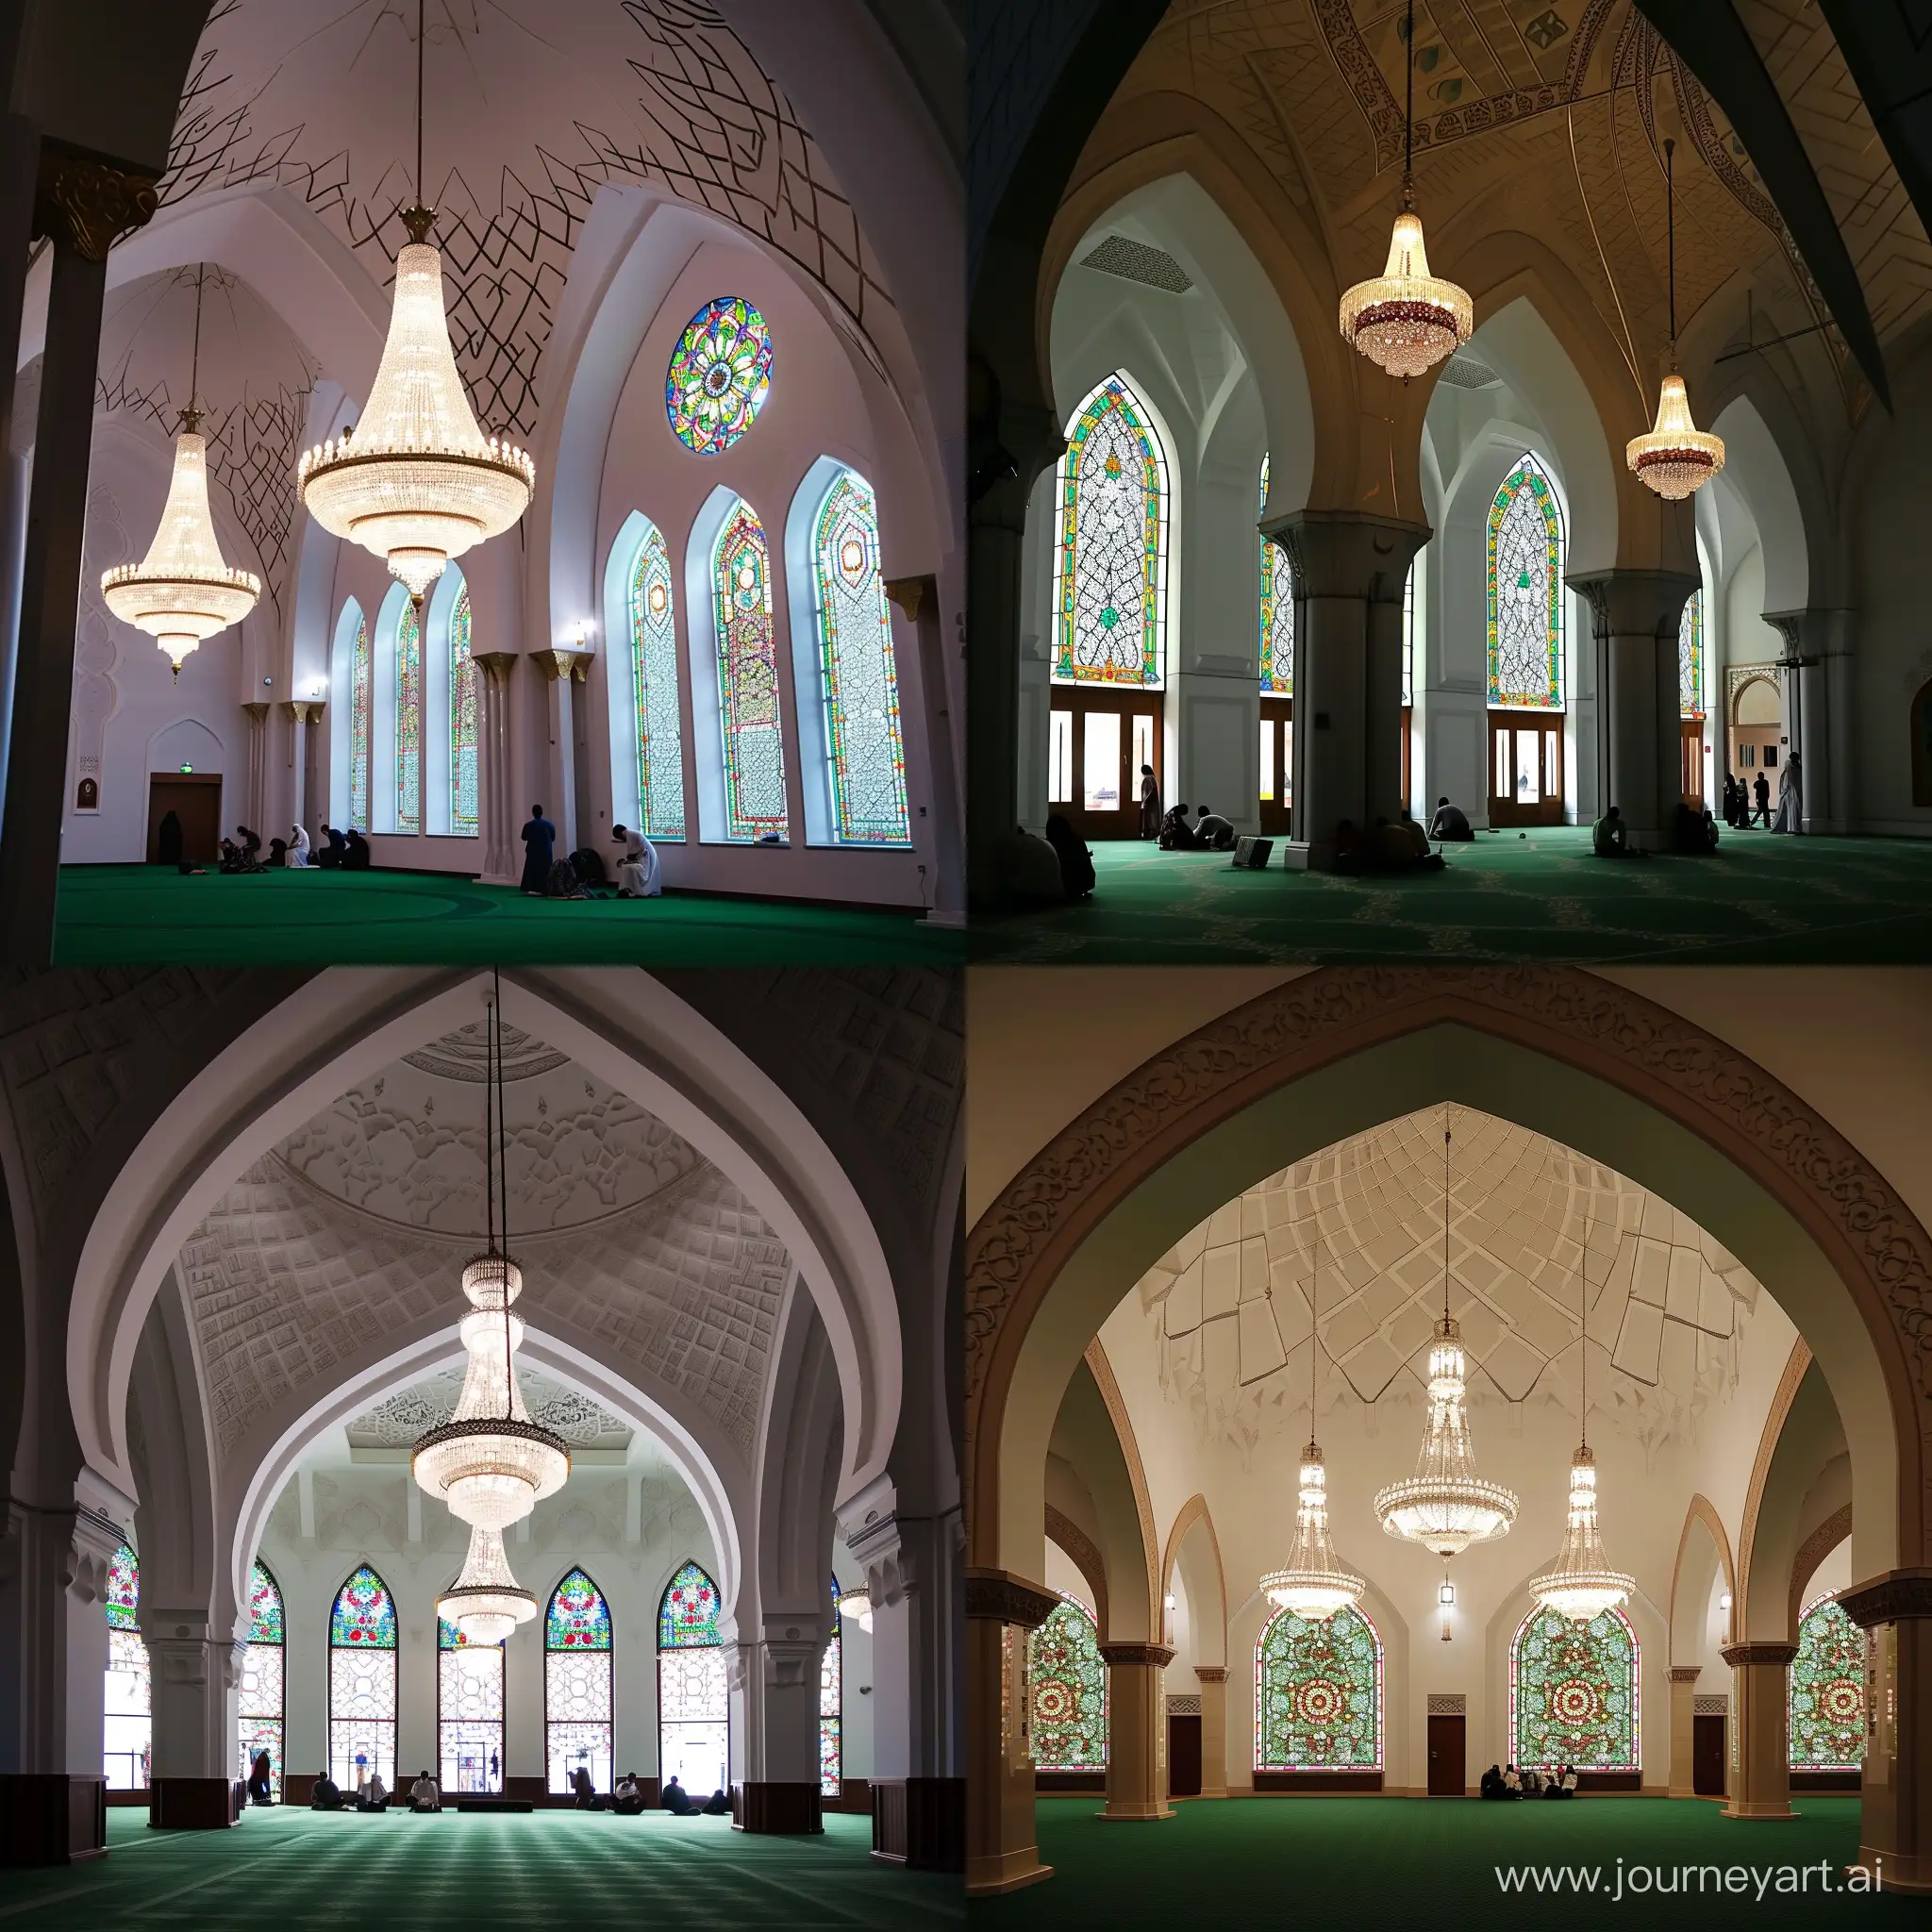 Elegant-Grand-Mosque-Interior-with-Arches-and-Stained-Glass-Windows